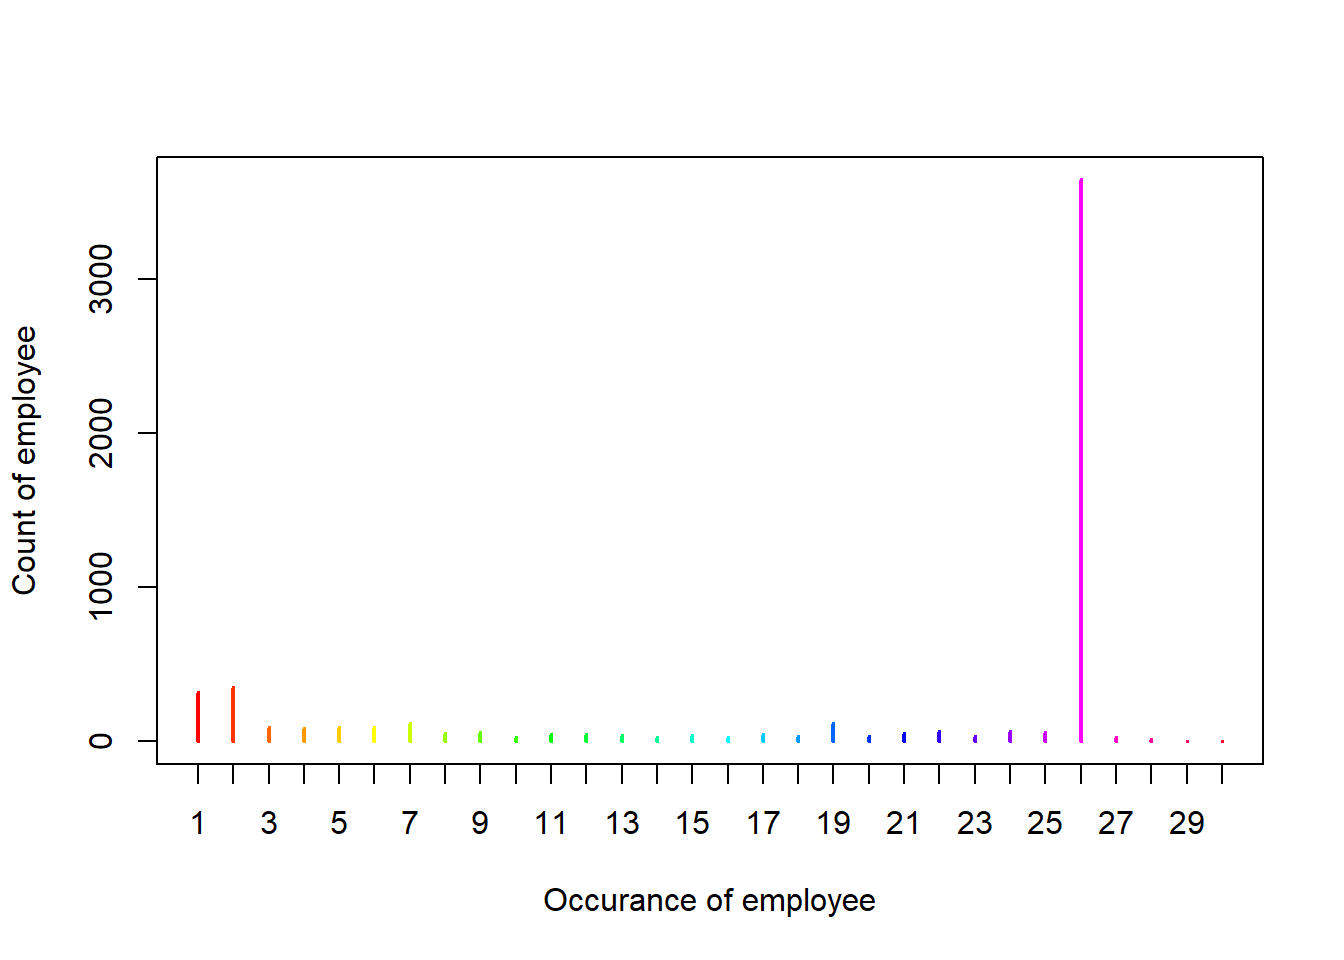 Situation of check occurance of employees.